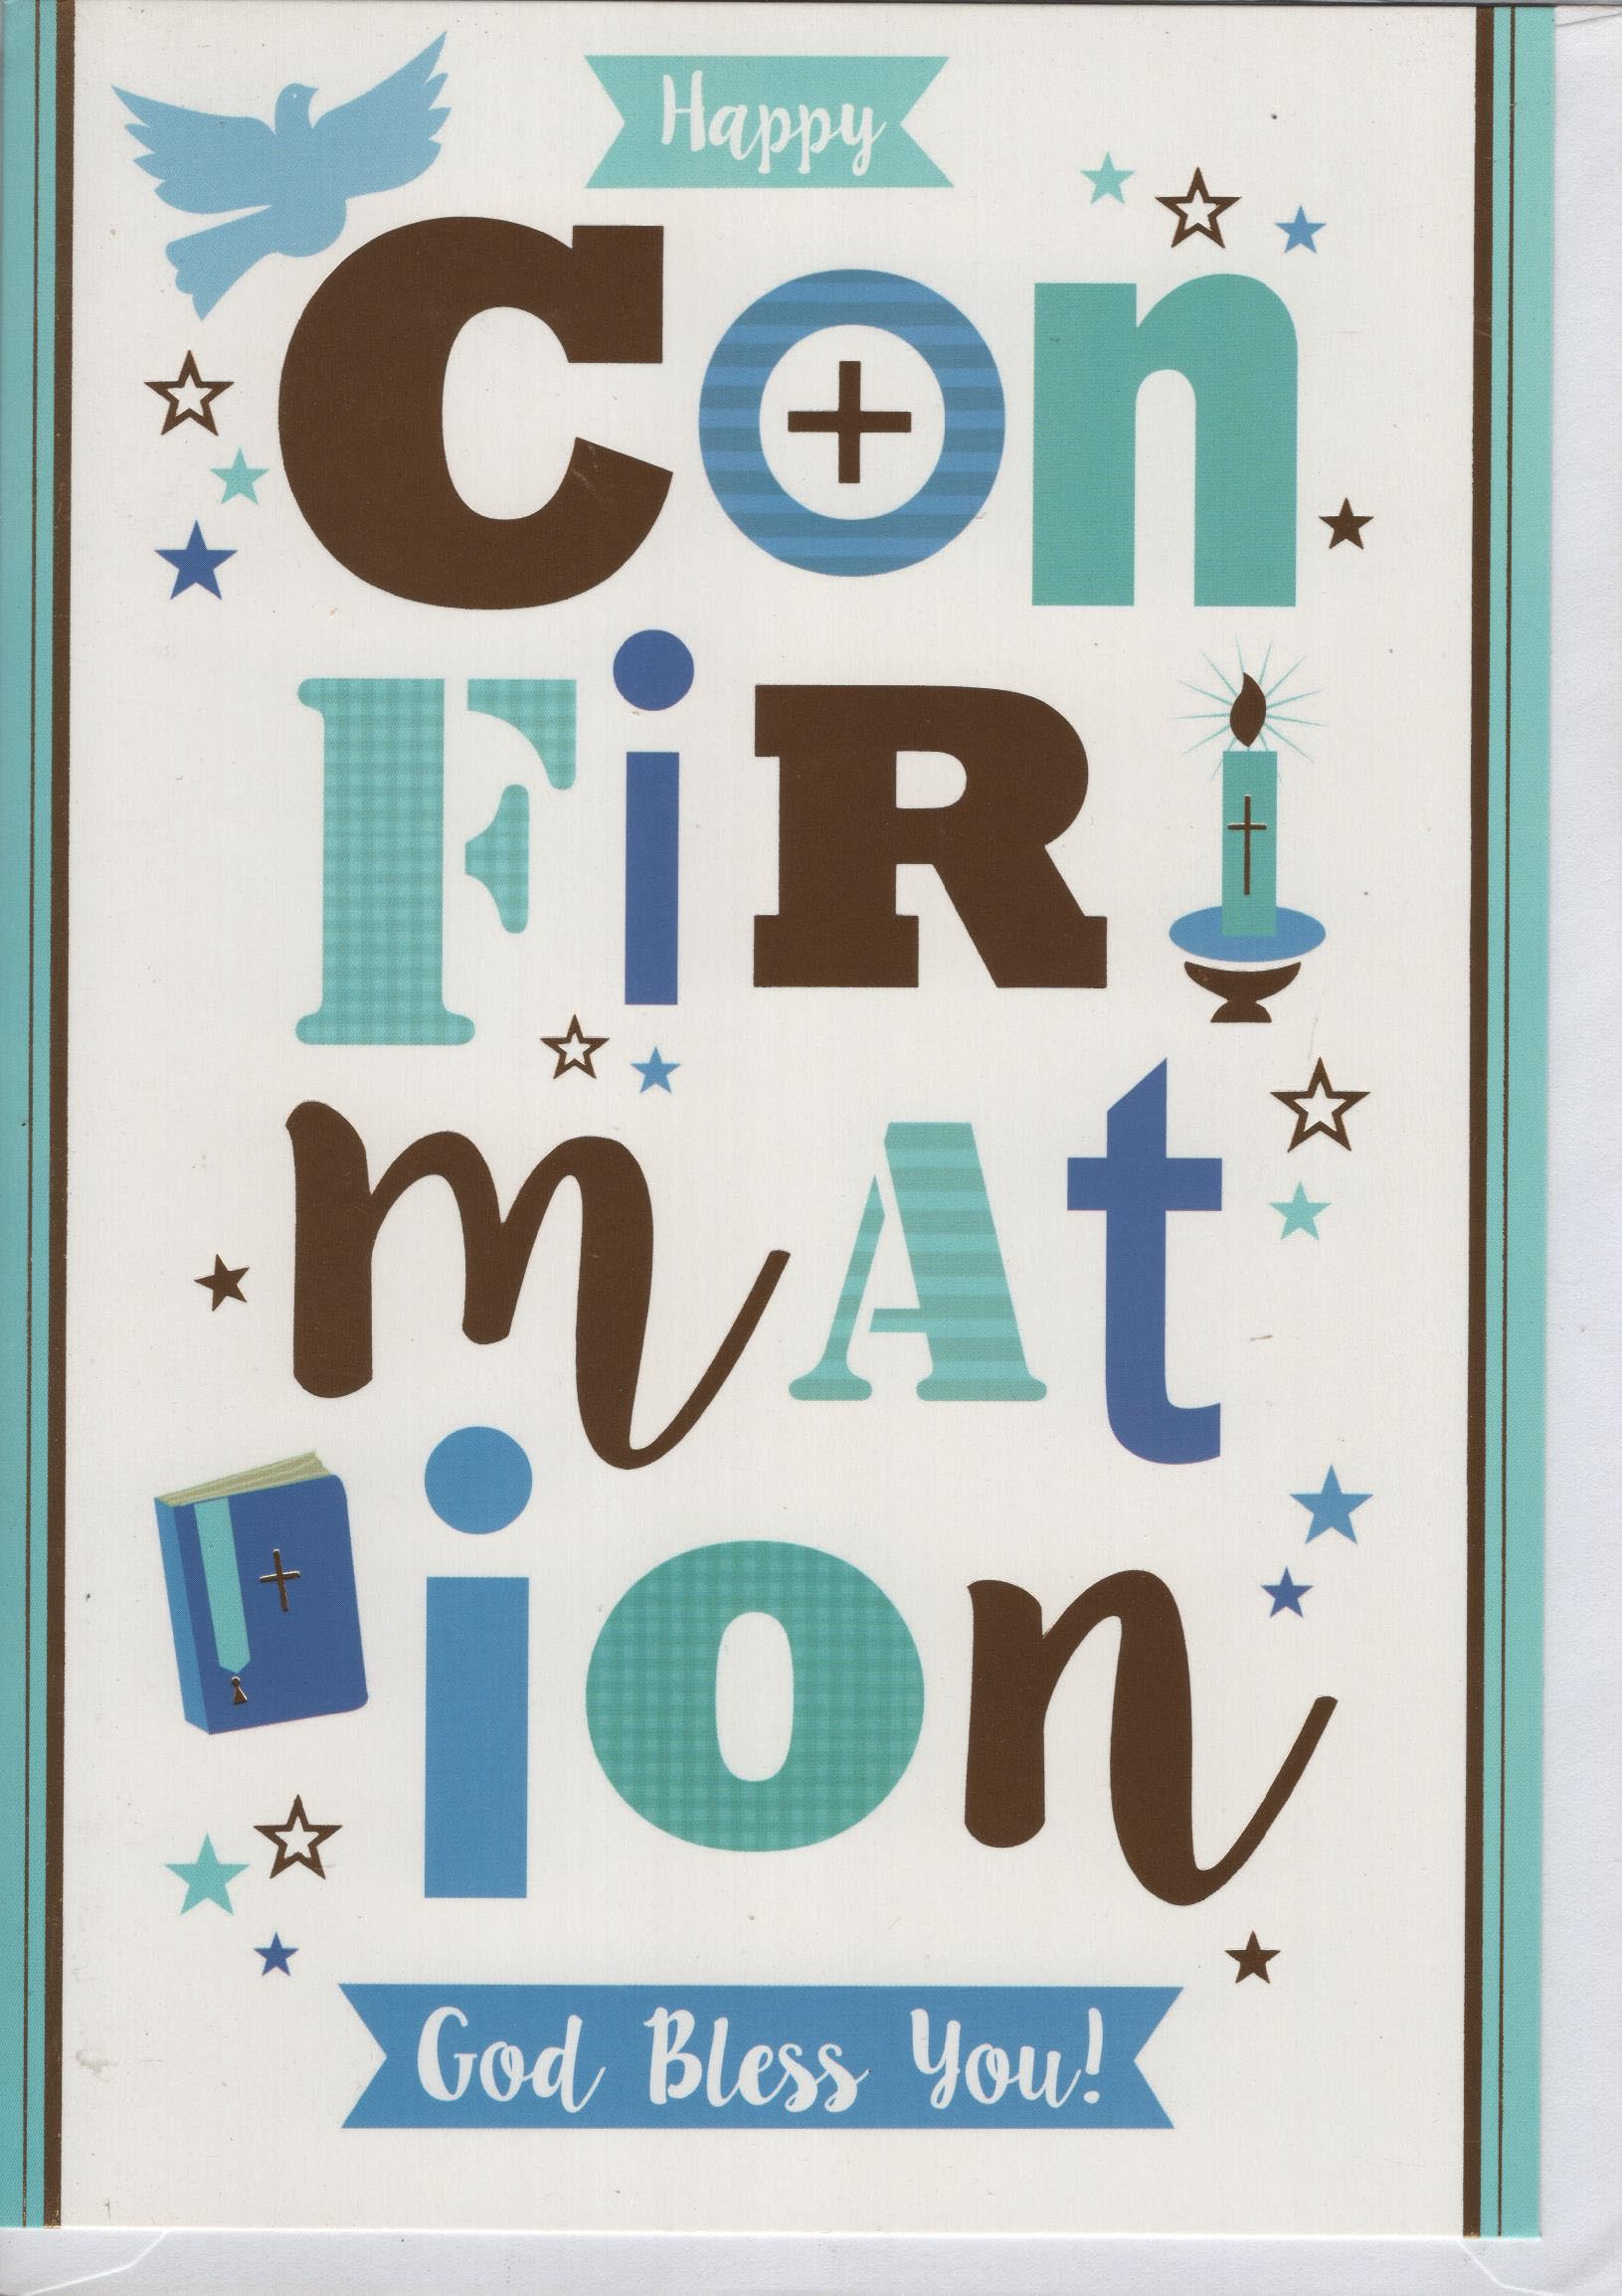 Xpress Yourself : Happy Confirmation God Bless You ! Greeting Card